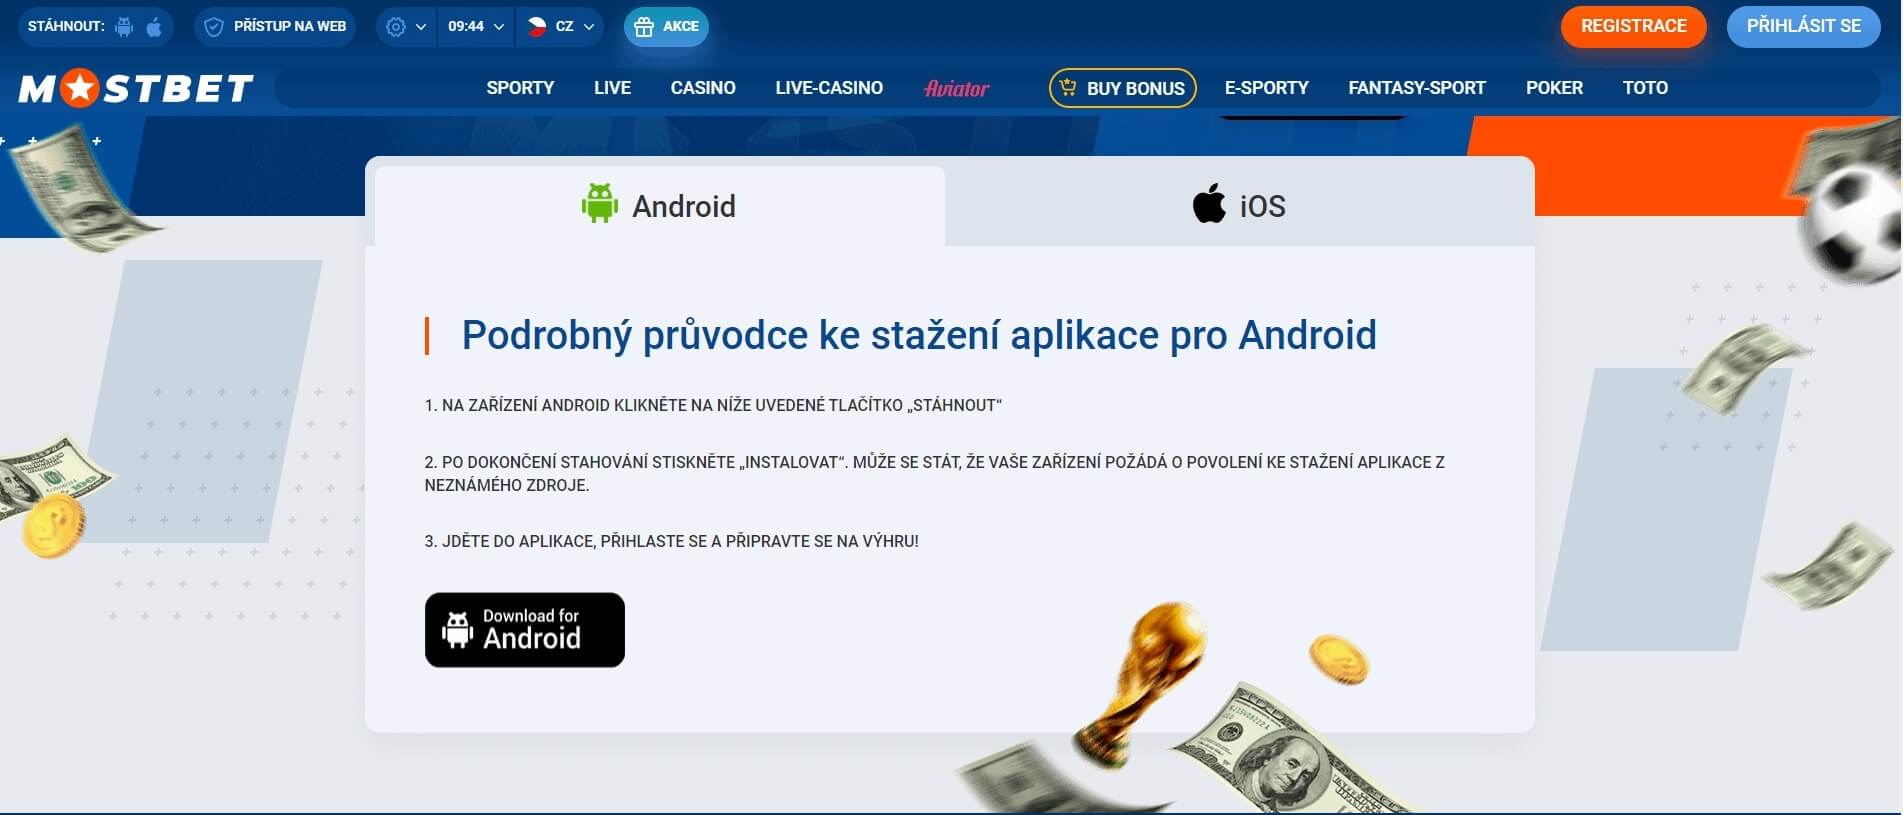 Aplikace Mostbet pro Android